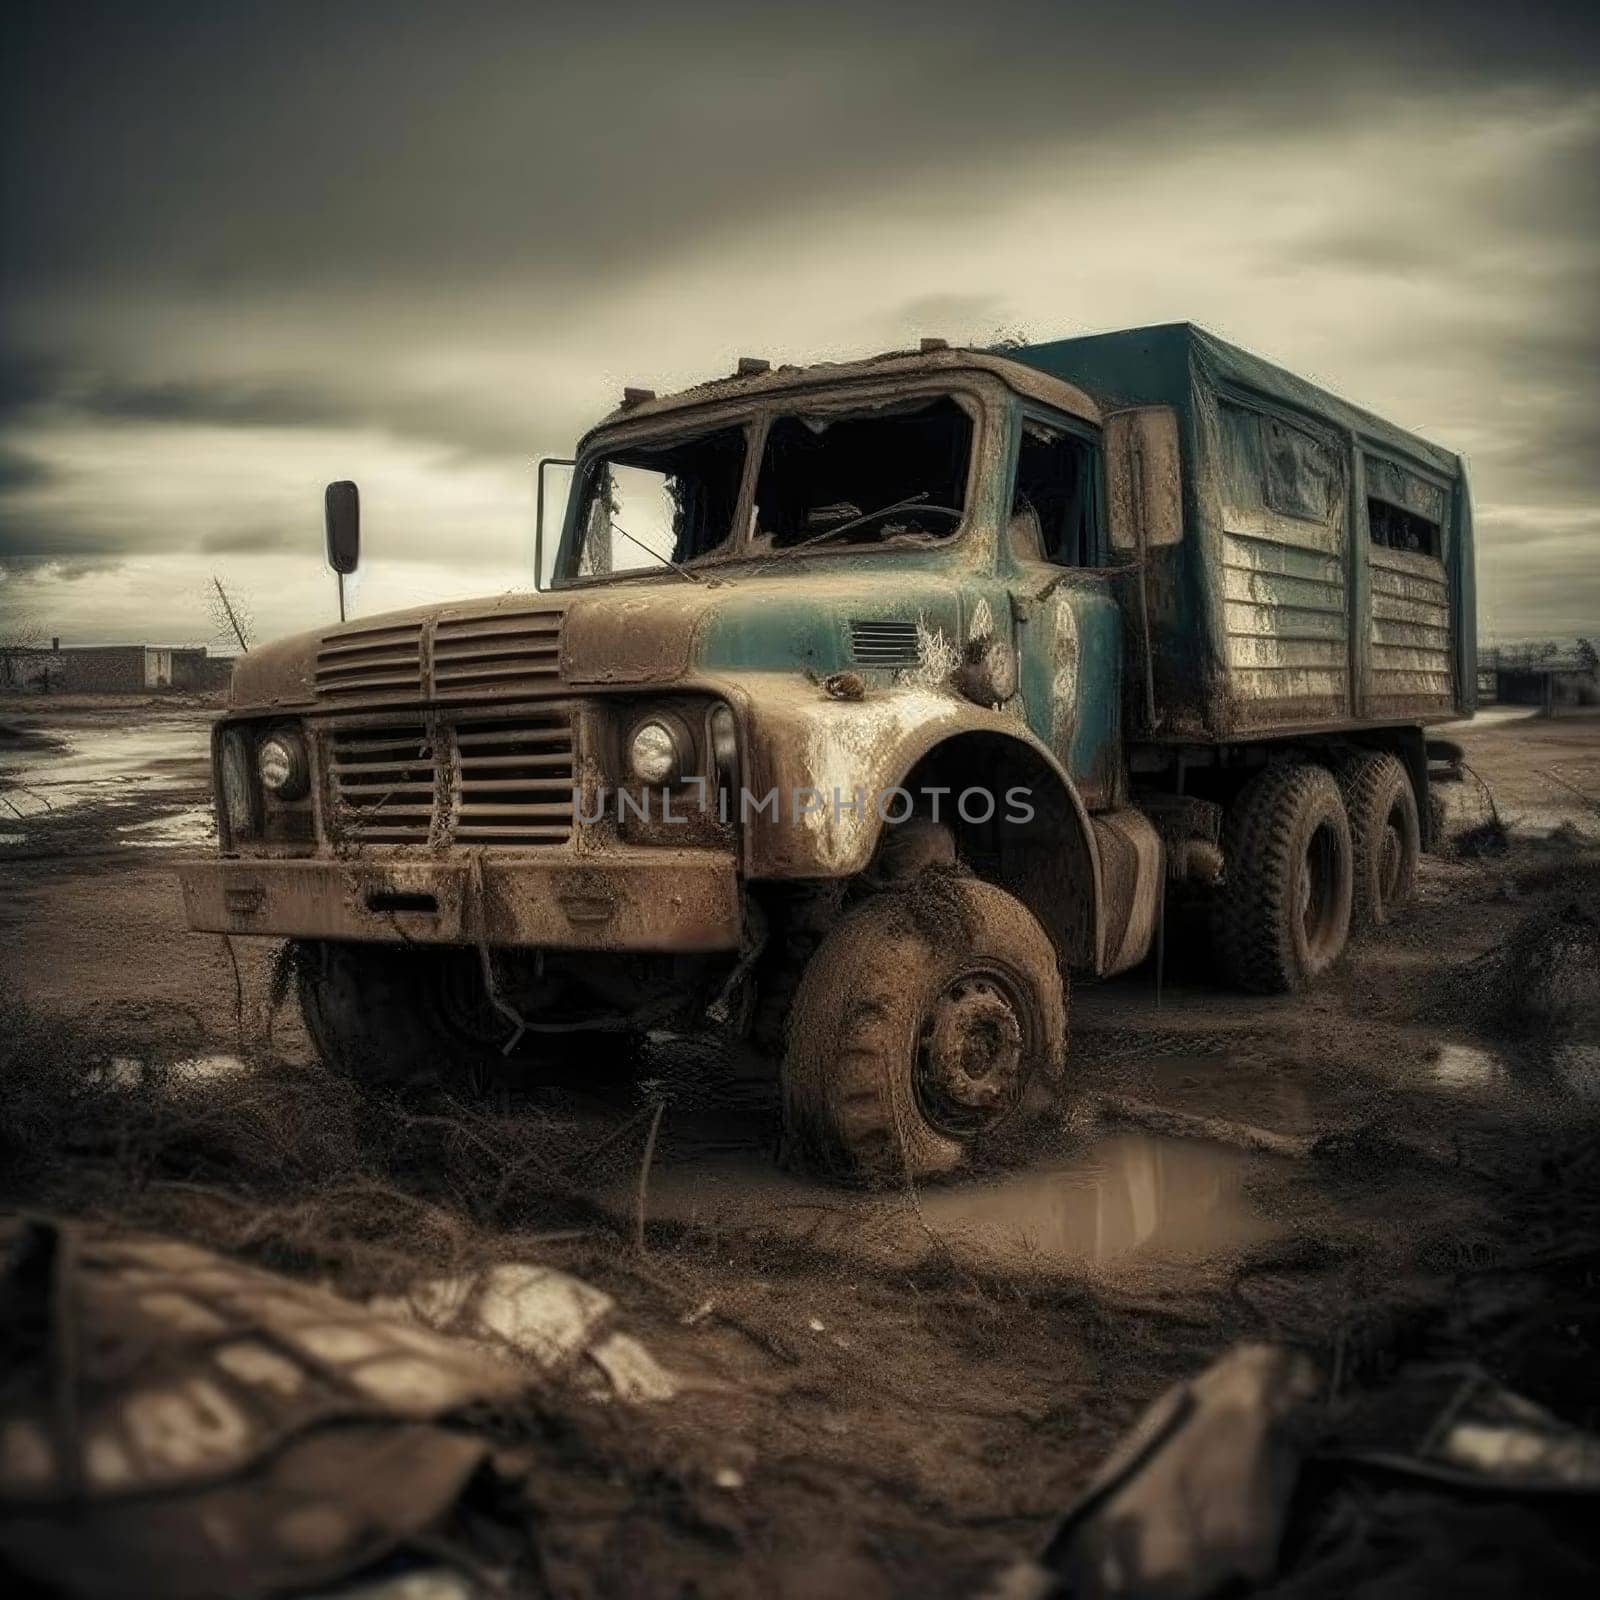 Old truck in the mud - photo in old color image style by eduardobellotto